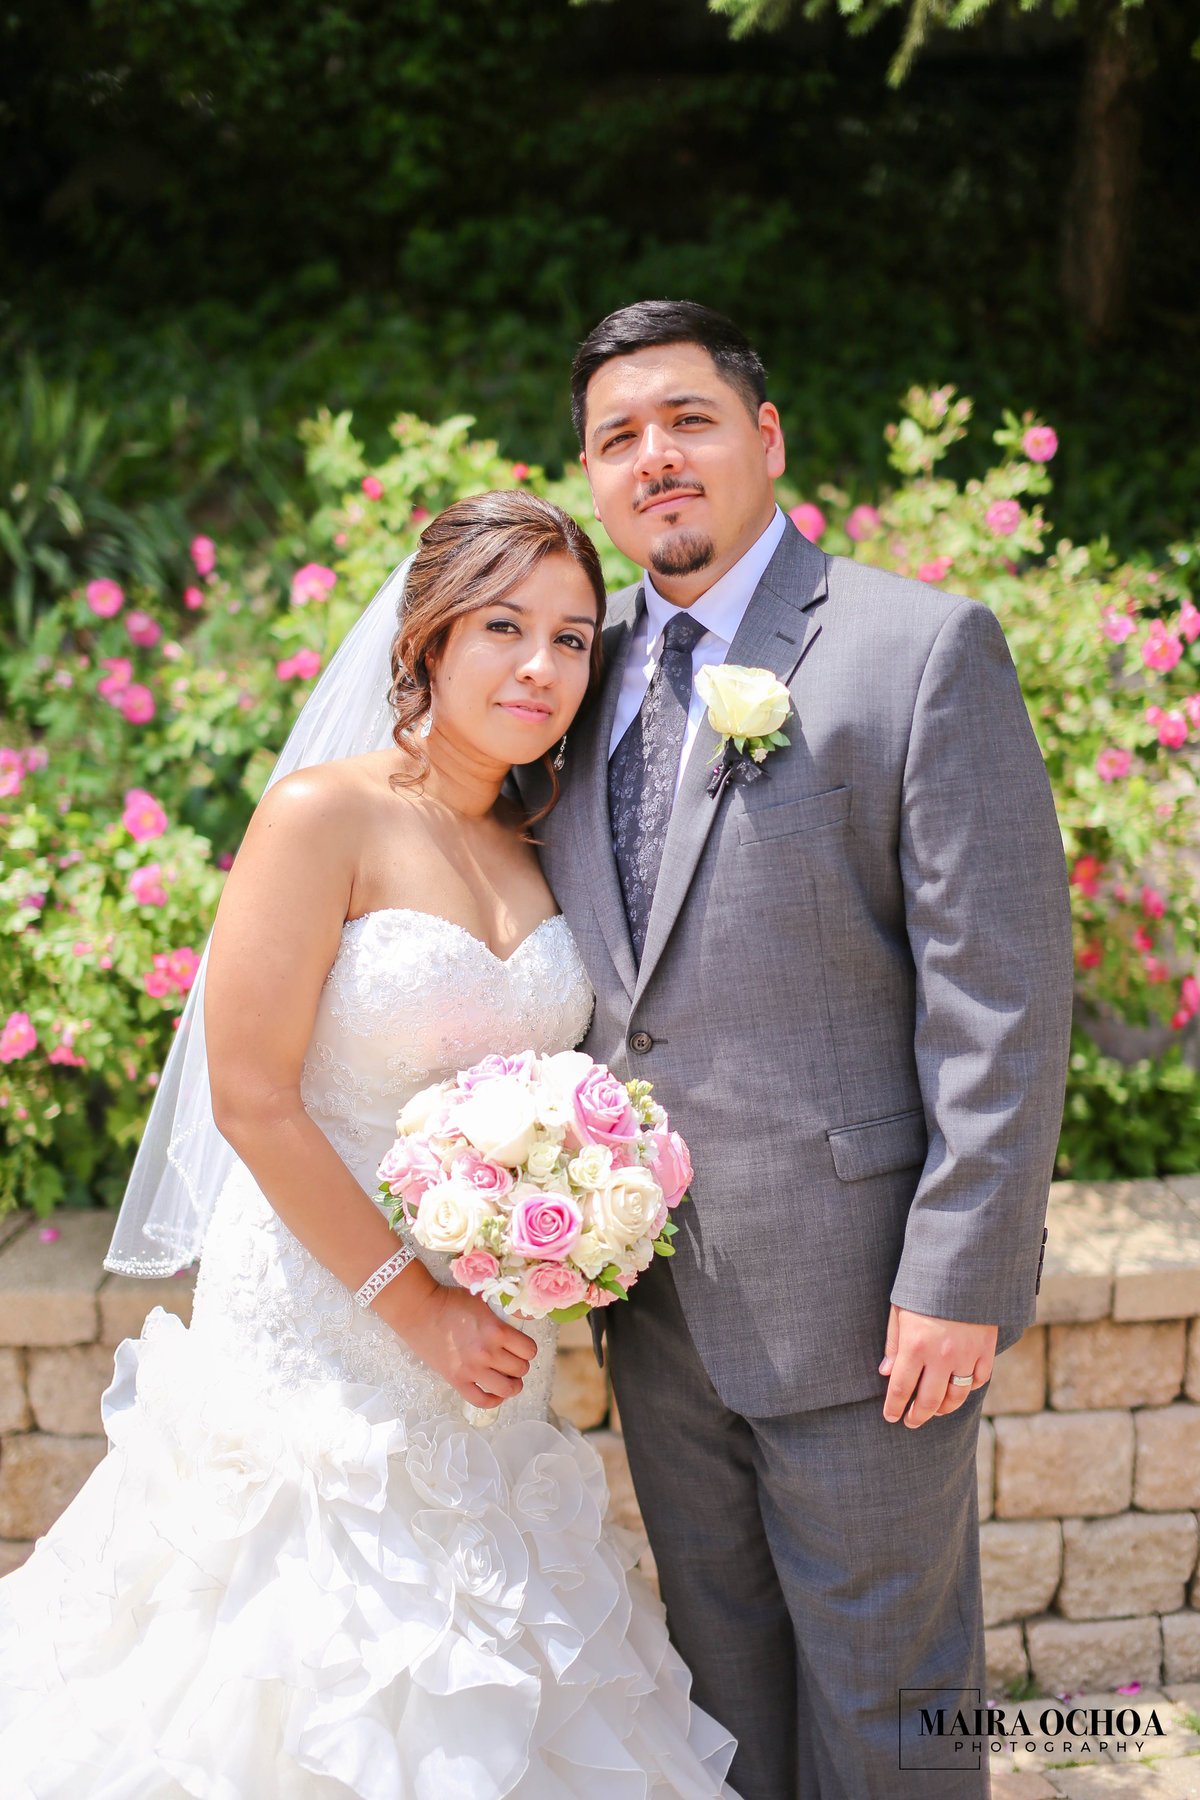 Weding at the Shrine of Our Lady of Guadalupe, Des Plaines, IL Maira Ochoa Photography-6